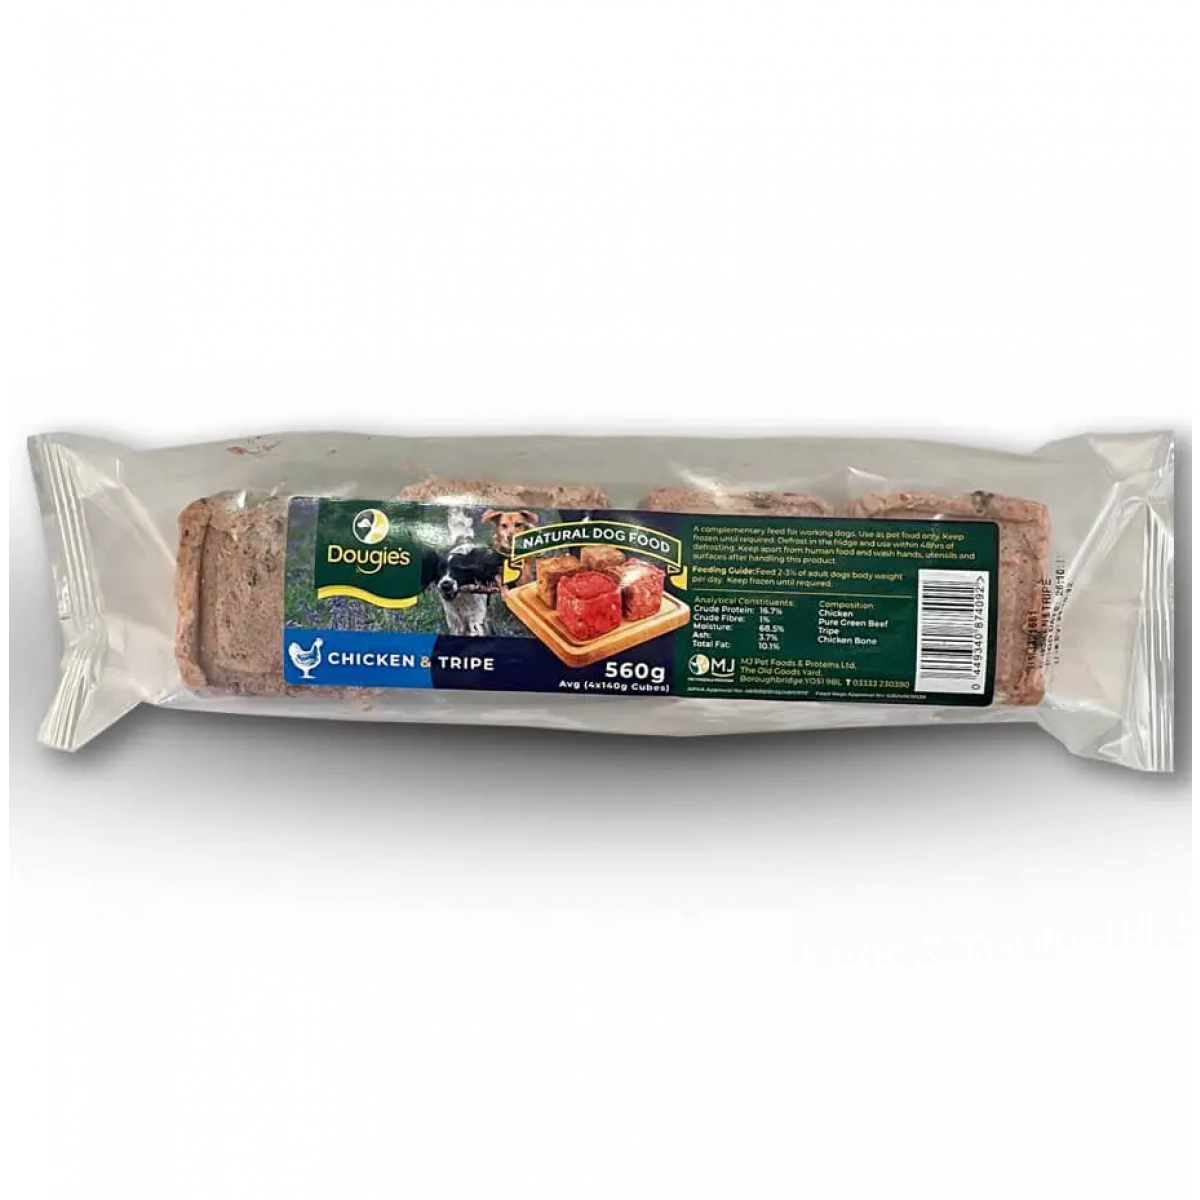 Dougie’s – Chicken & Tripe Mince 140g – Pawfect Supplies Ltd Product Image